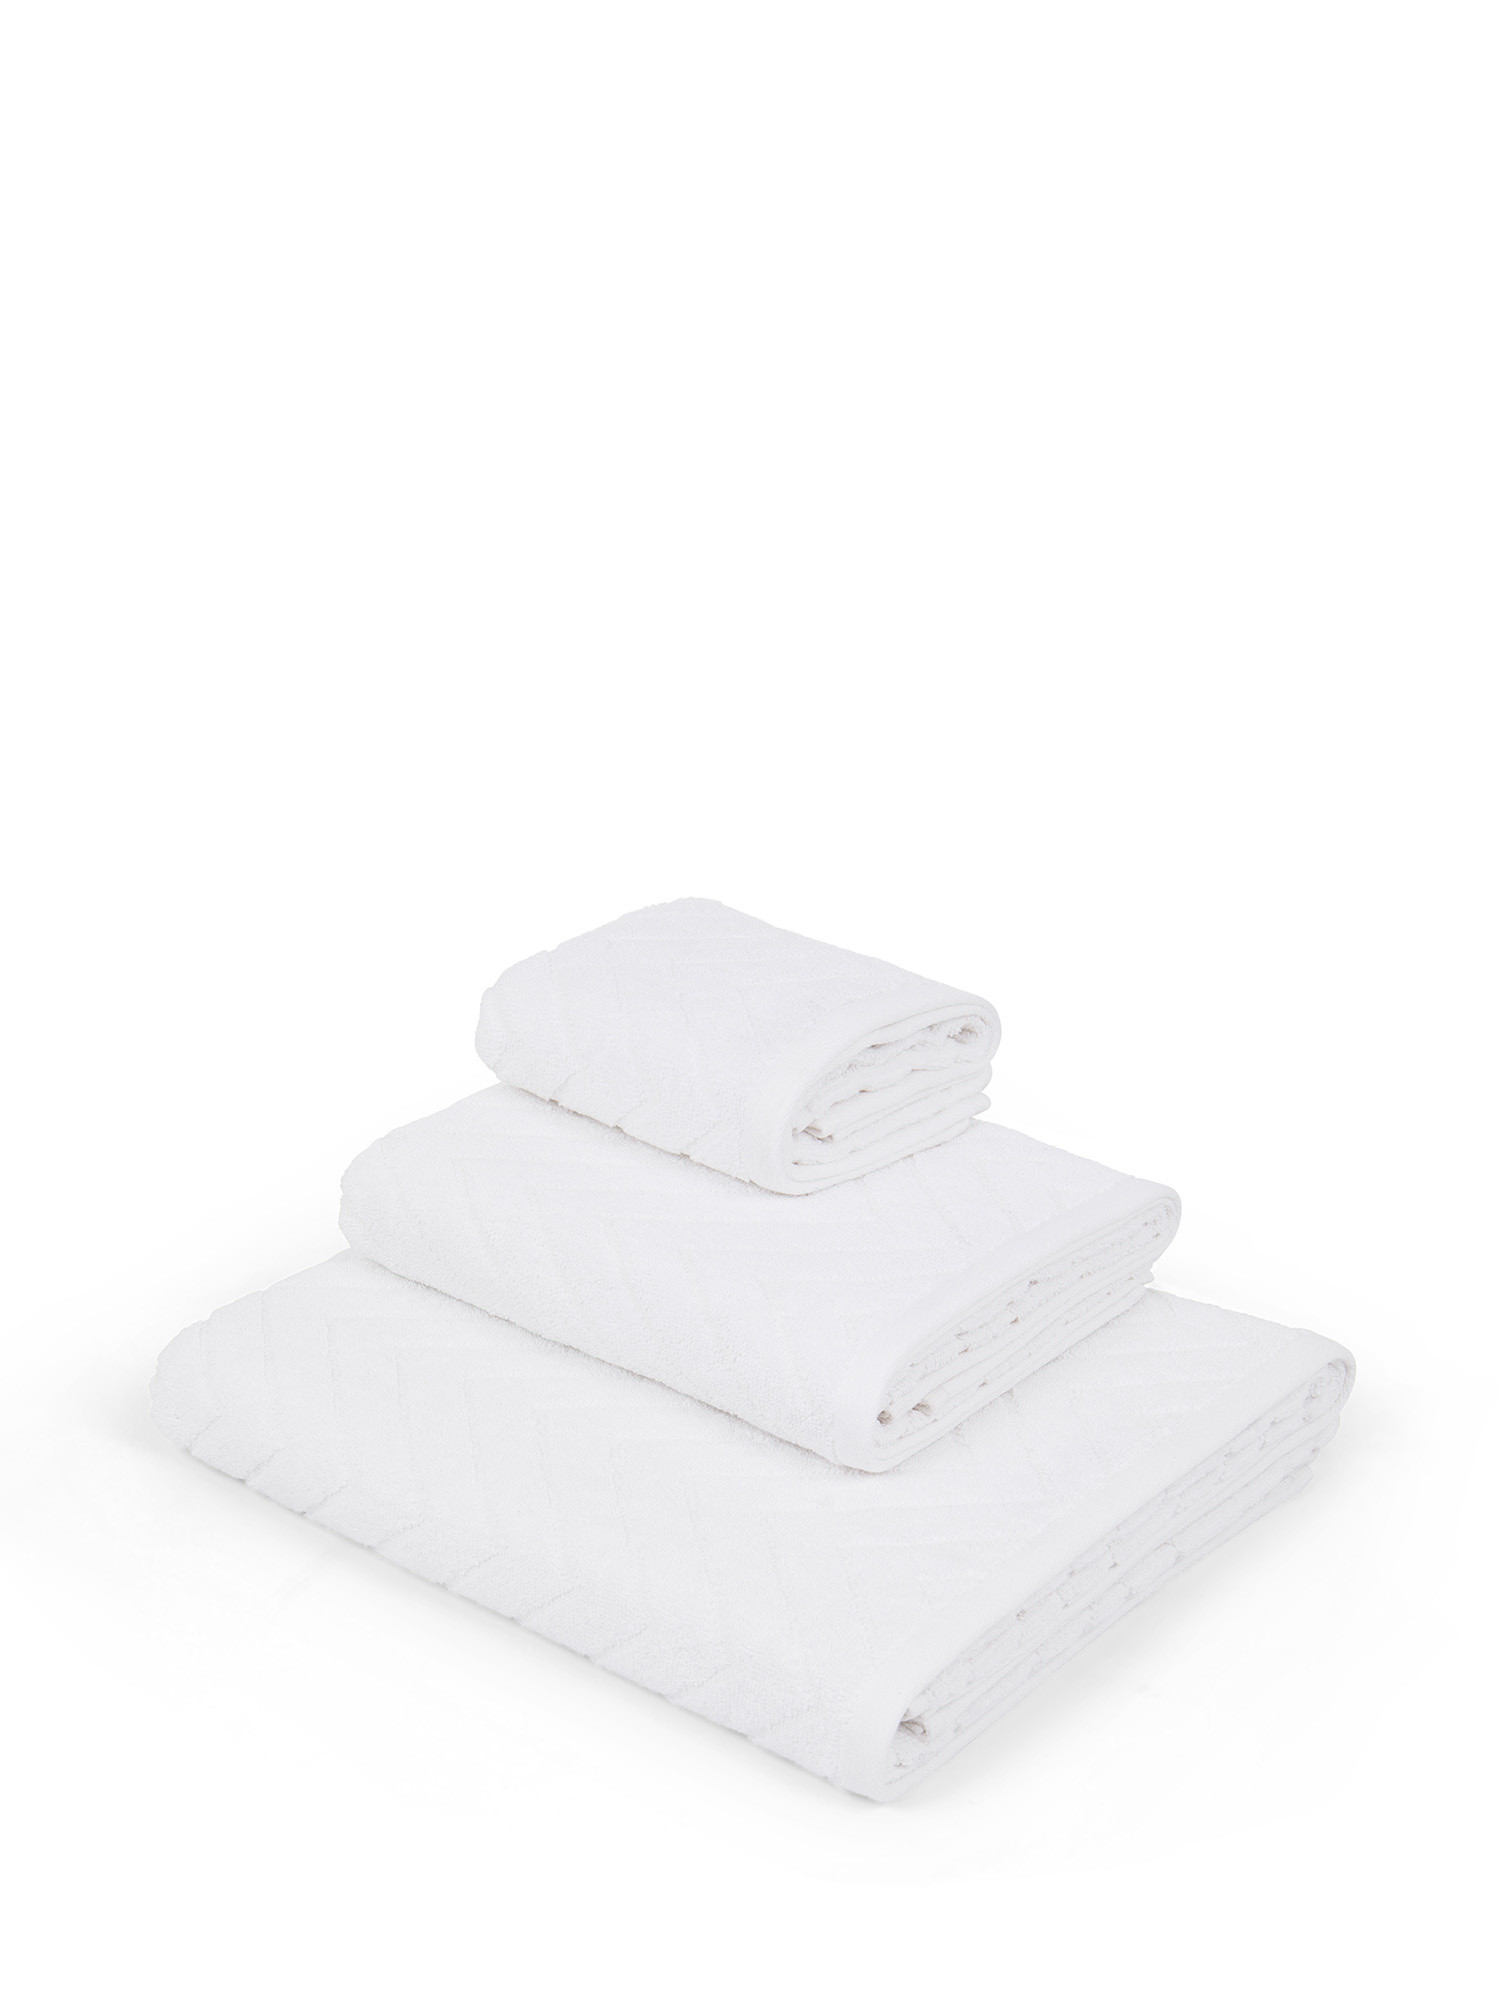 Cotton terry towel with Jacquard design, White, large image number 0